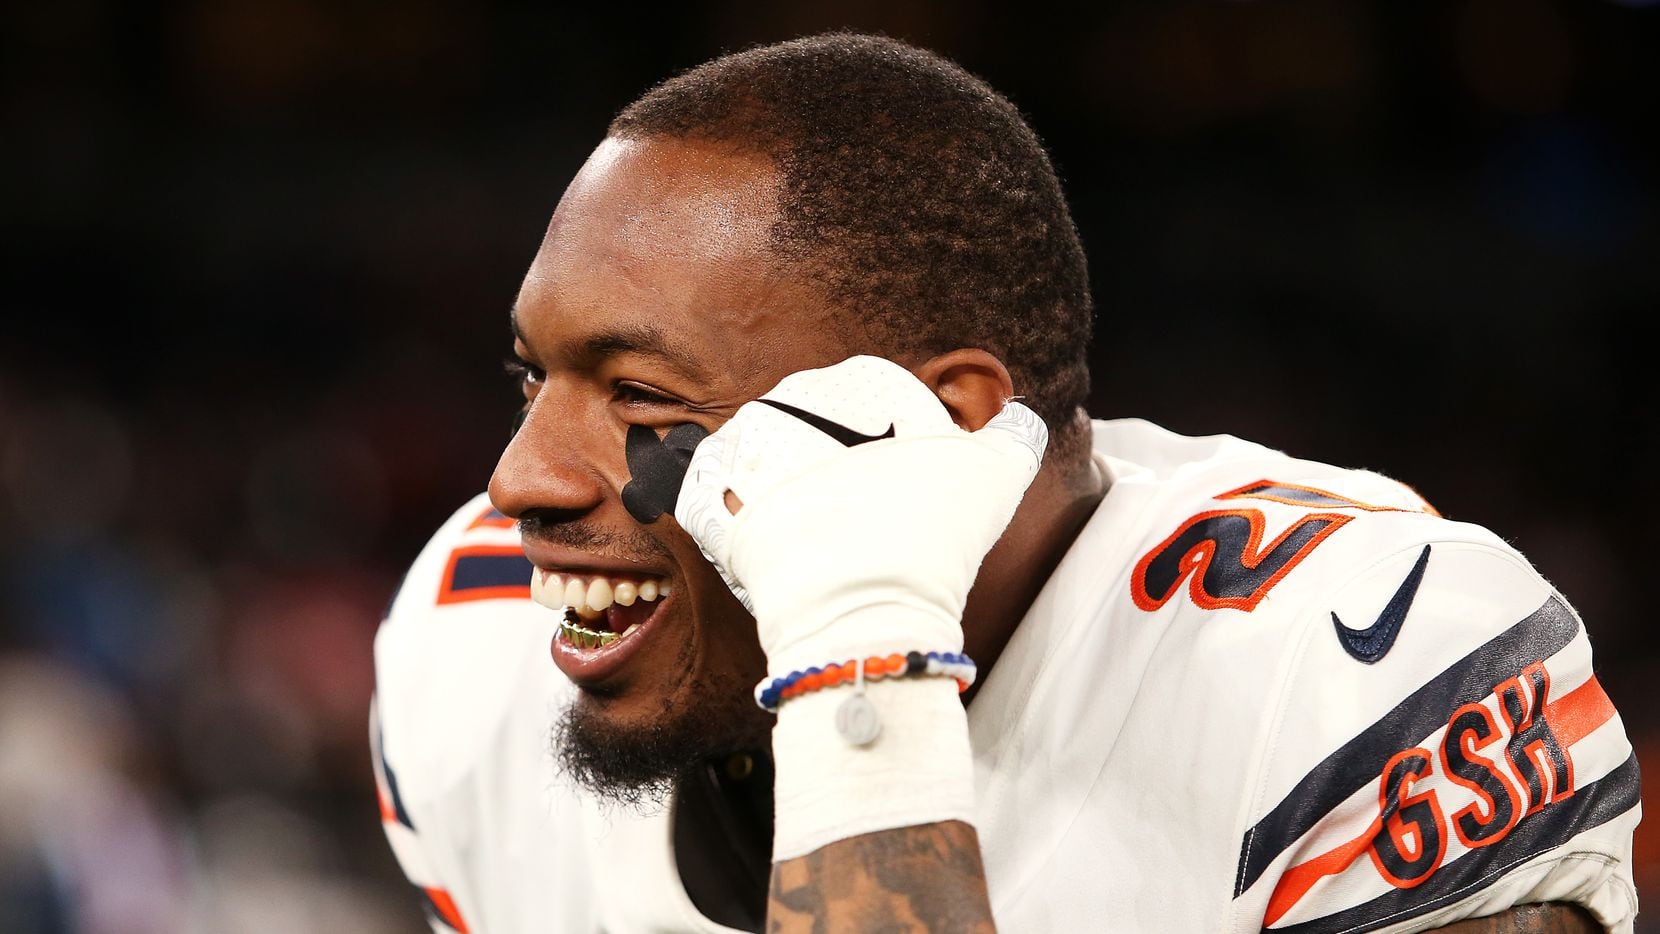 Ha Ha Clinton-Dix (21) of the Chicago Bears looks on after the game between the Chicago Bears and Oakland Raiders at Tottenham Hotspur Stadium on October 06, 2019 in London, England.